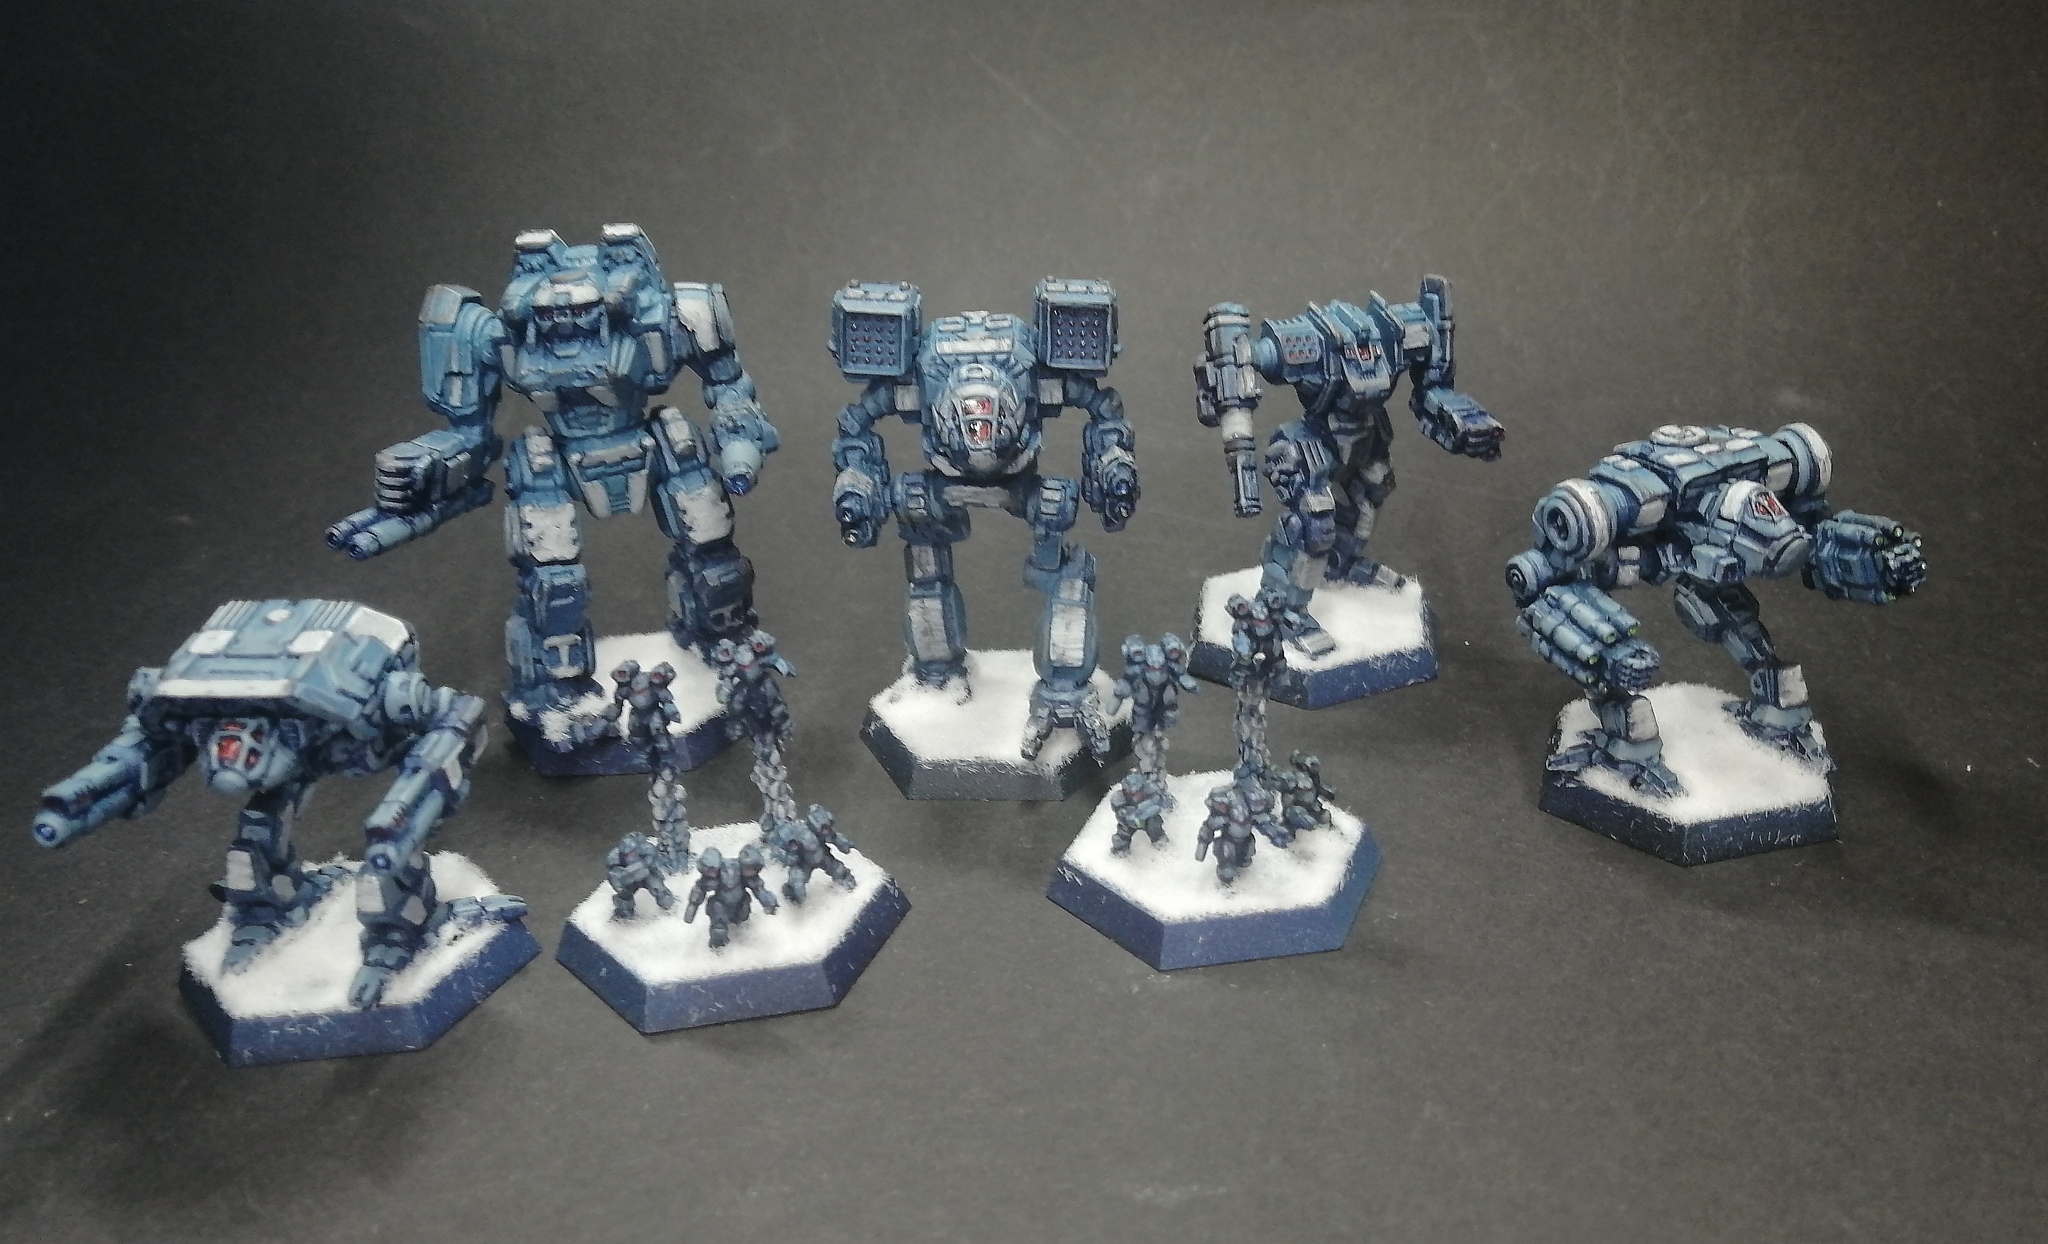 Clan Ghost Bear - My, Collection, Battletech, Modeling, Wargame, Collecting, Miniature, Board games, Longpost